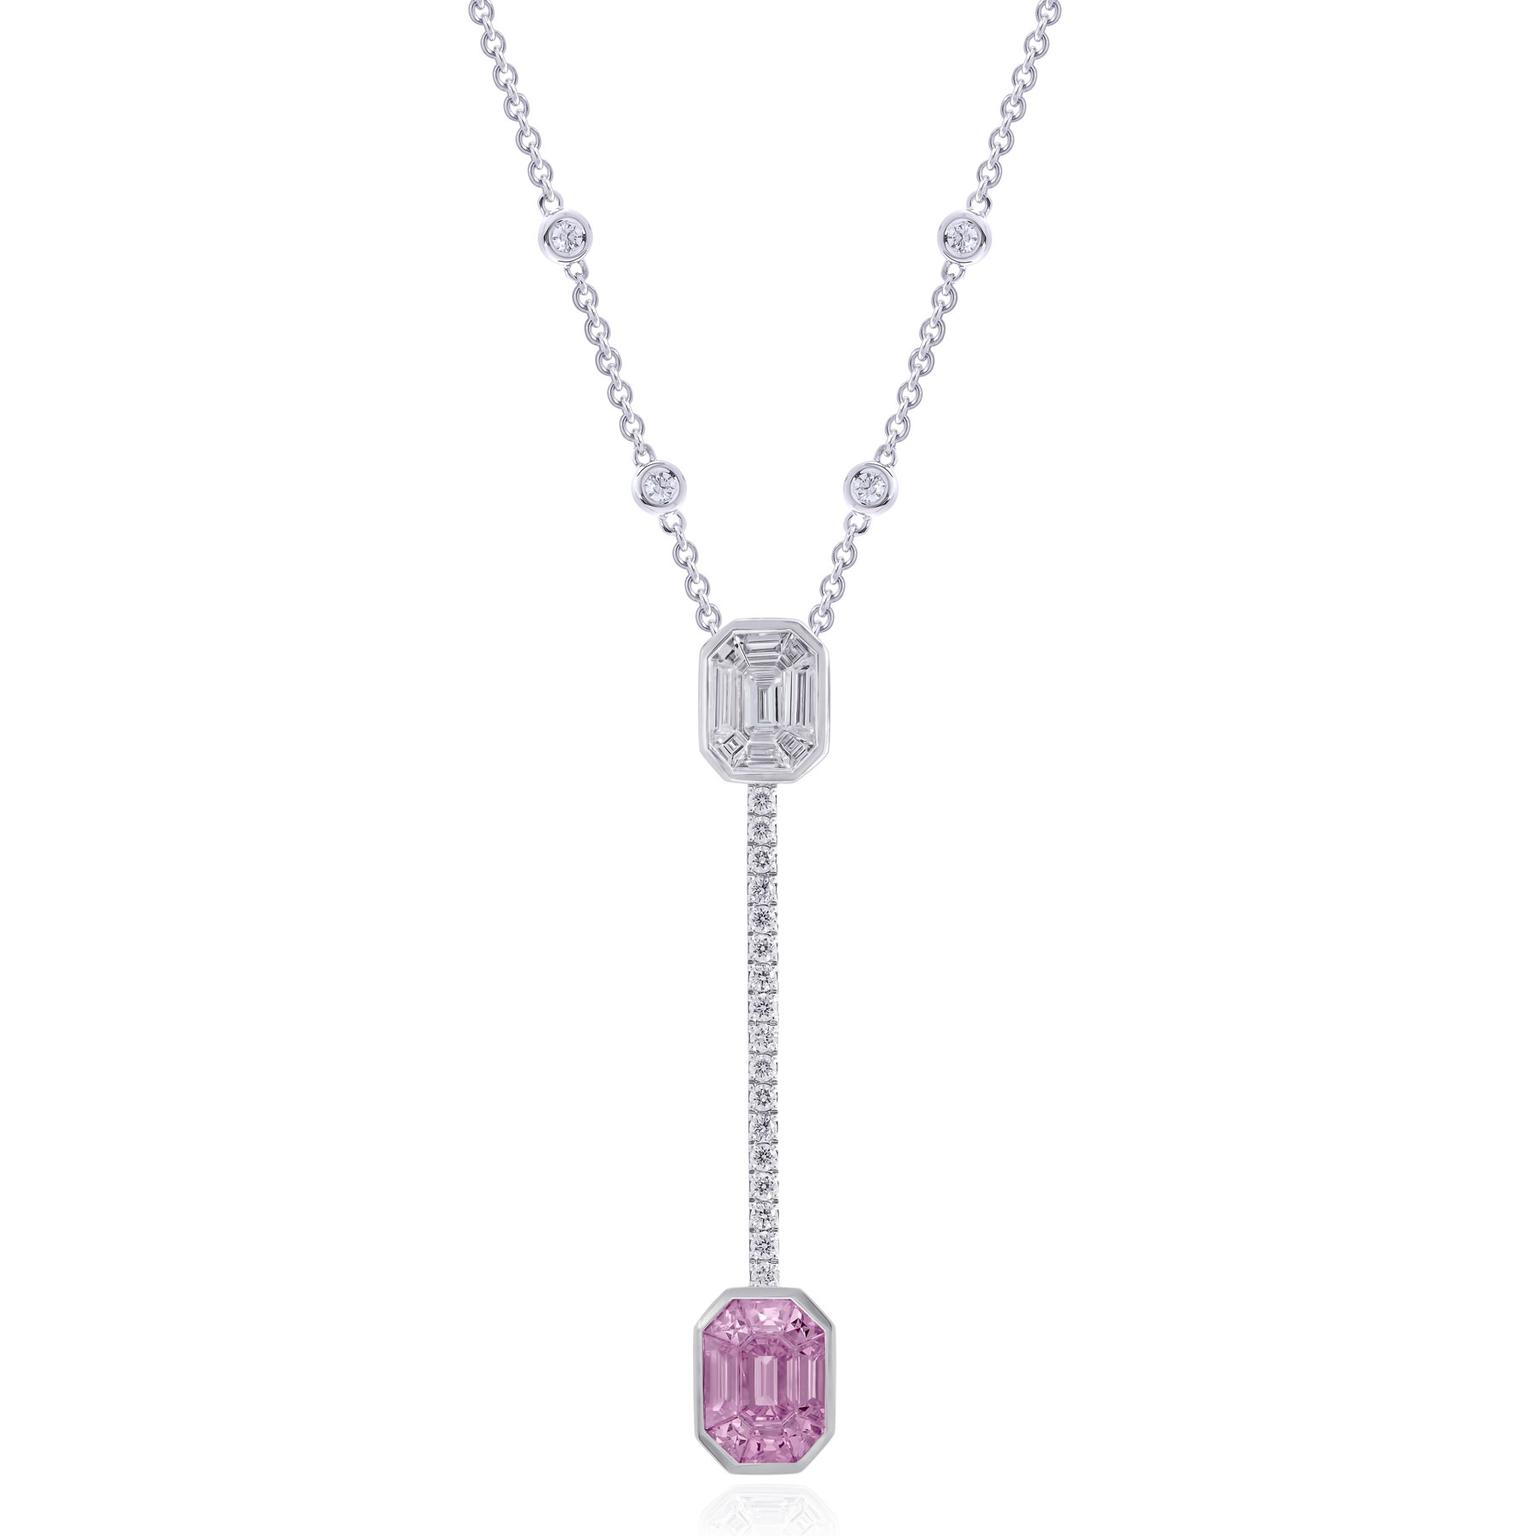 Stenzhorn pink sapphire and diamond necklace